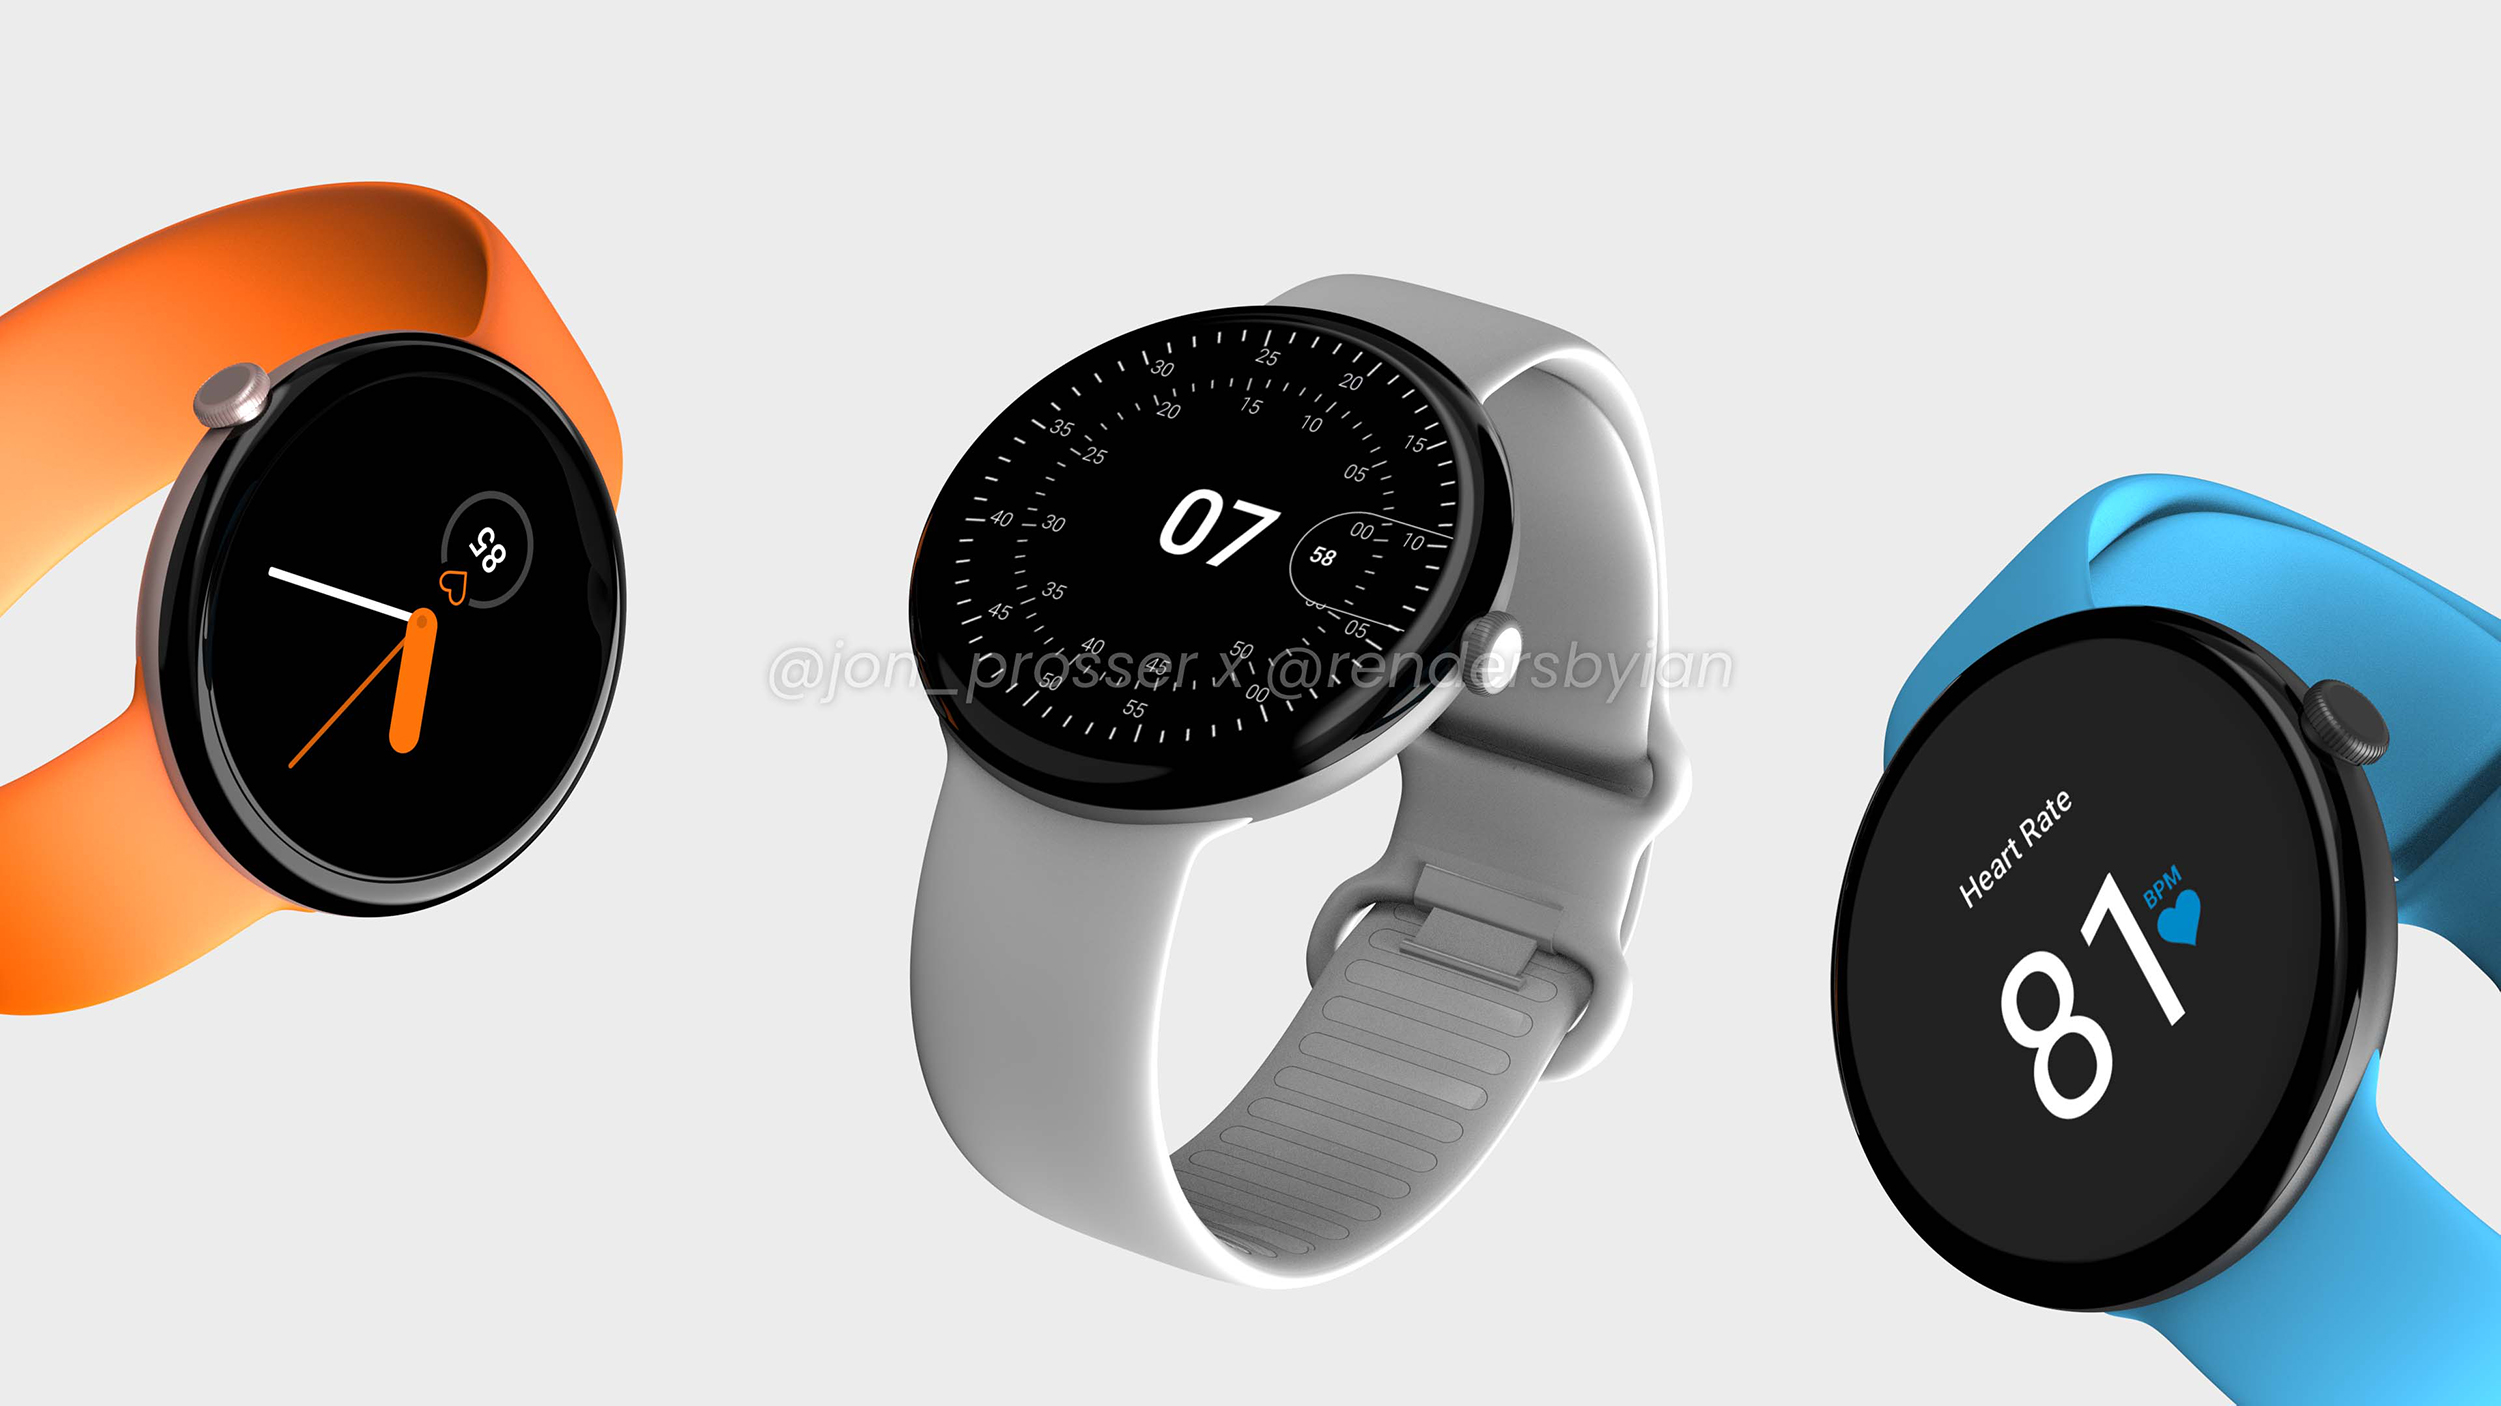 Renders of Pixel Watch based on alleged leaked images and marketing materials